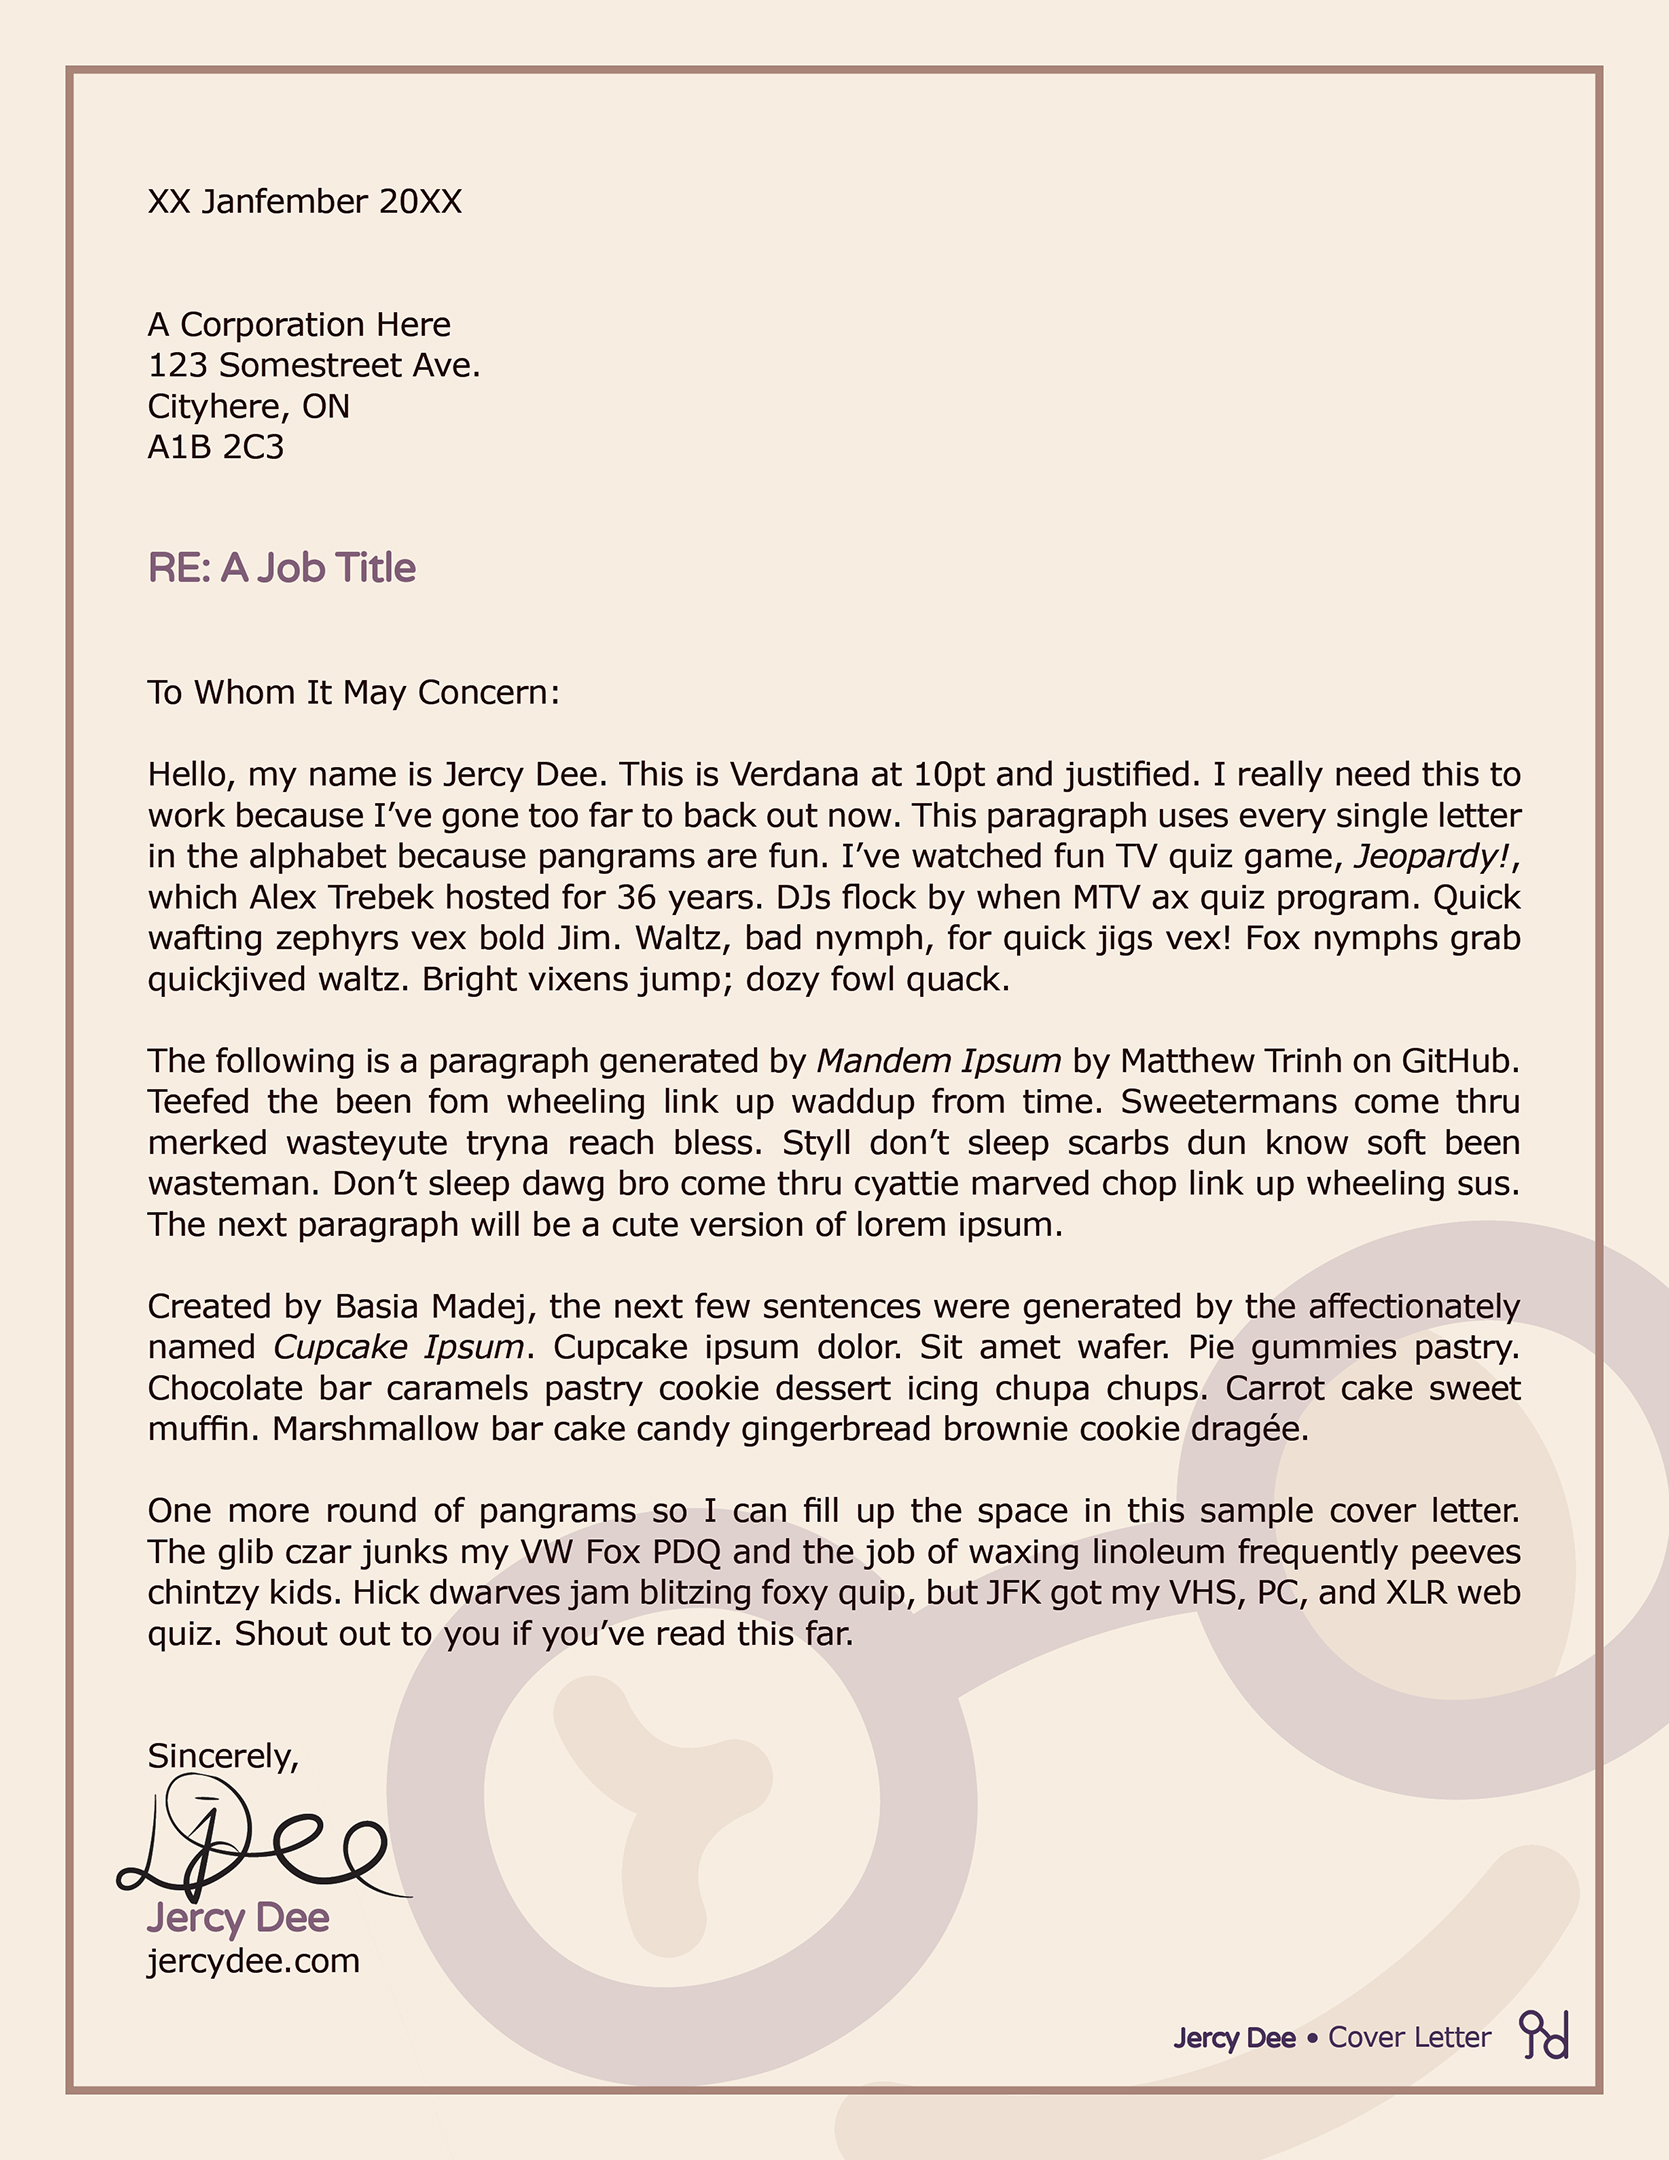 An example of a design-based cover letter using my brand.